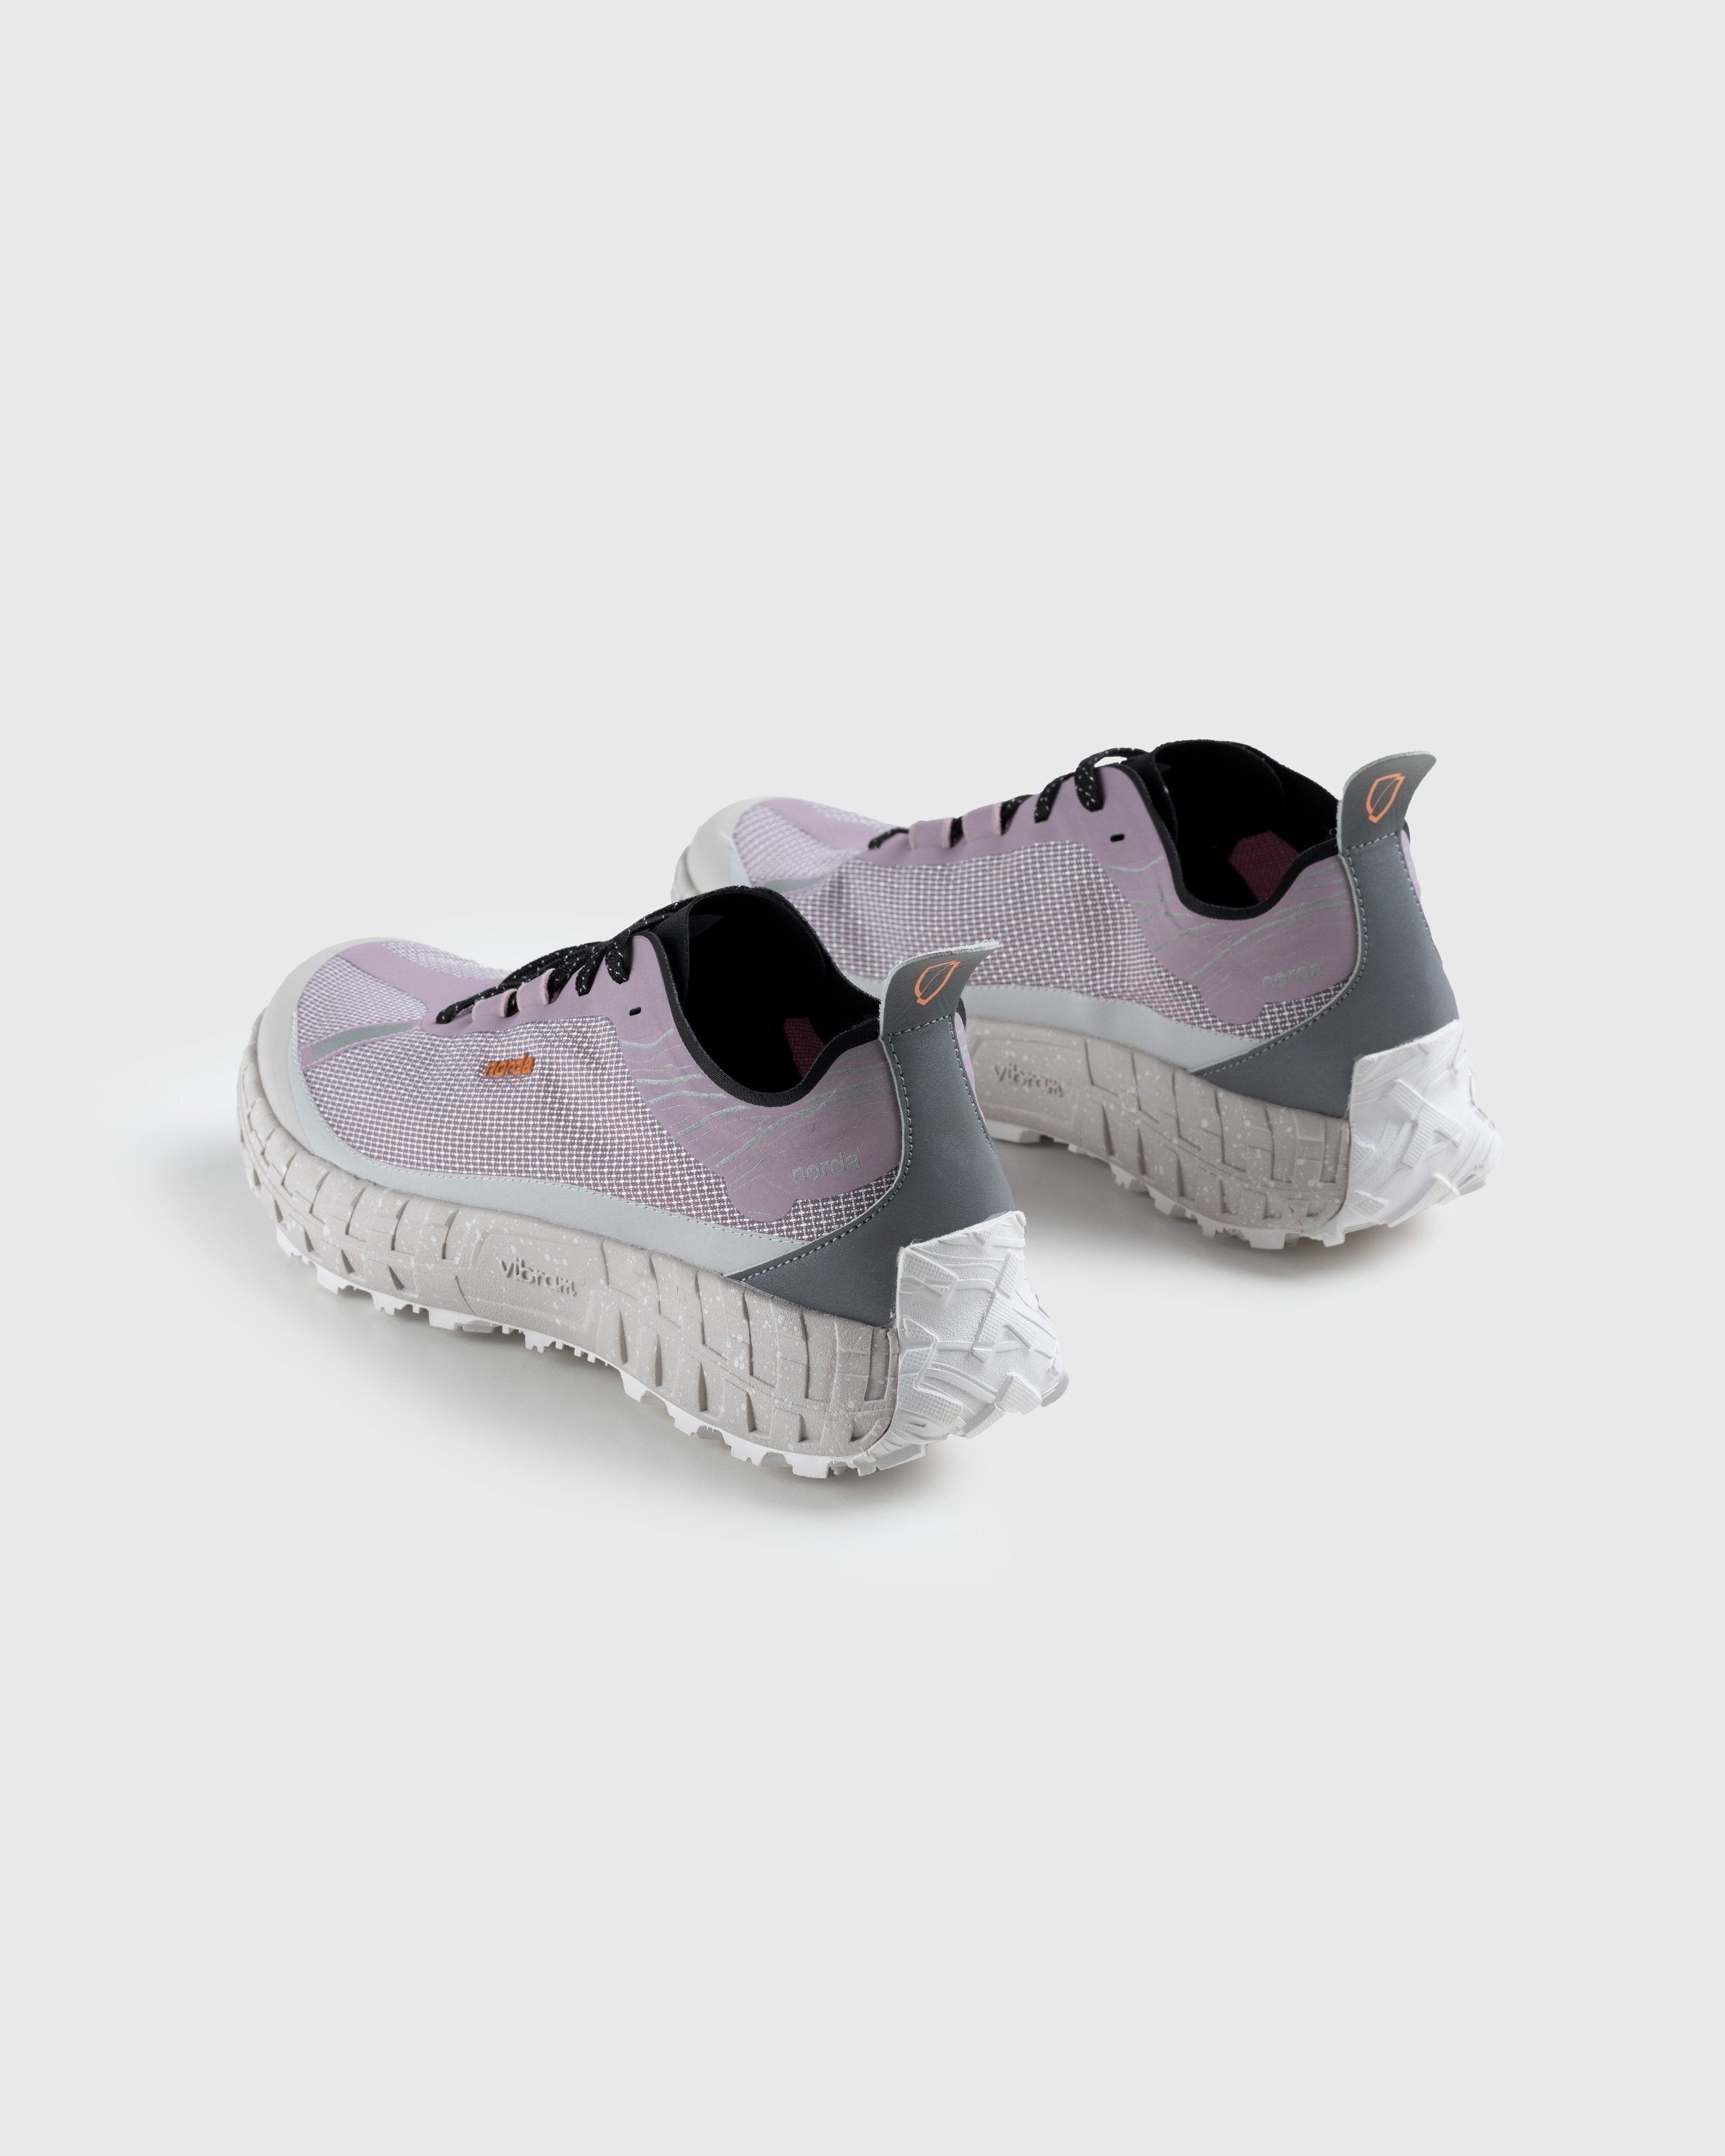 Norda – 001 W LTD Edition Lilac - Low Top Sneakers - Purple - Image 4